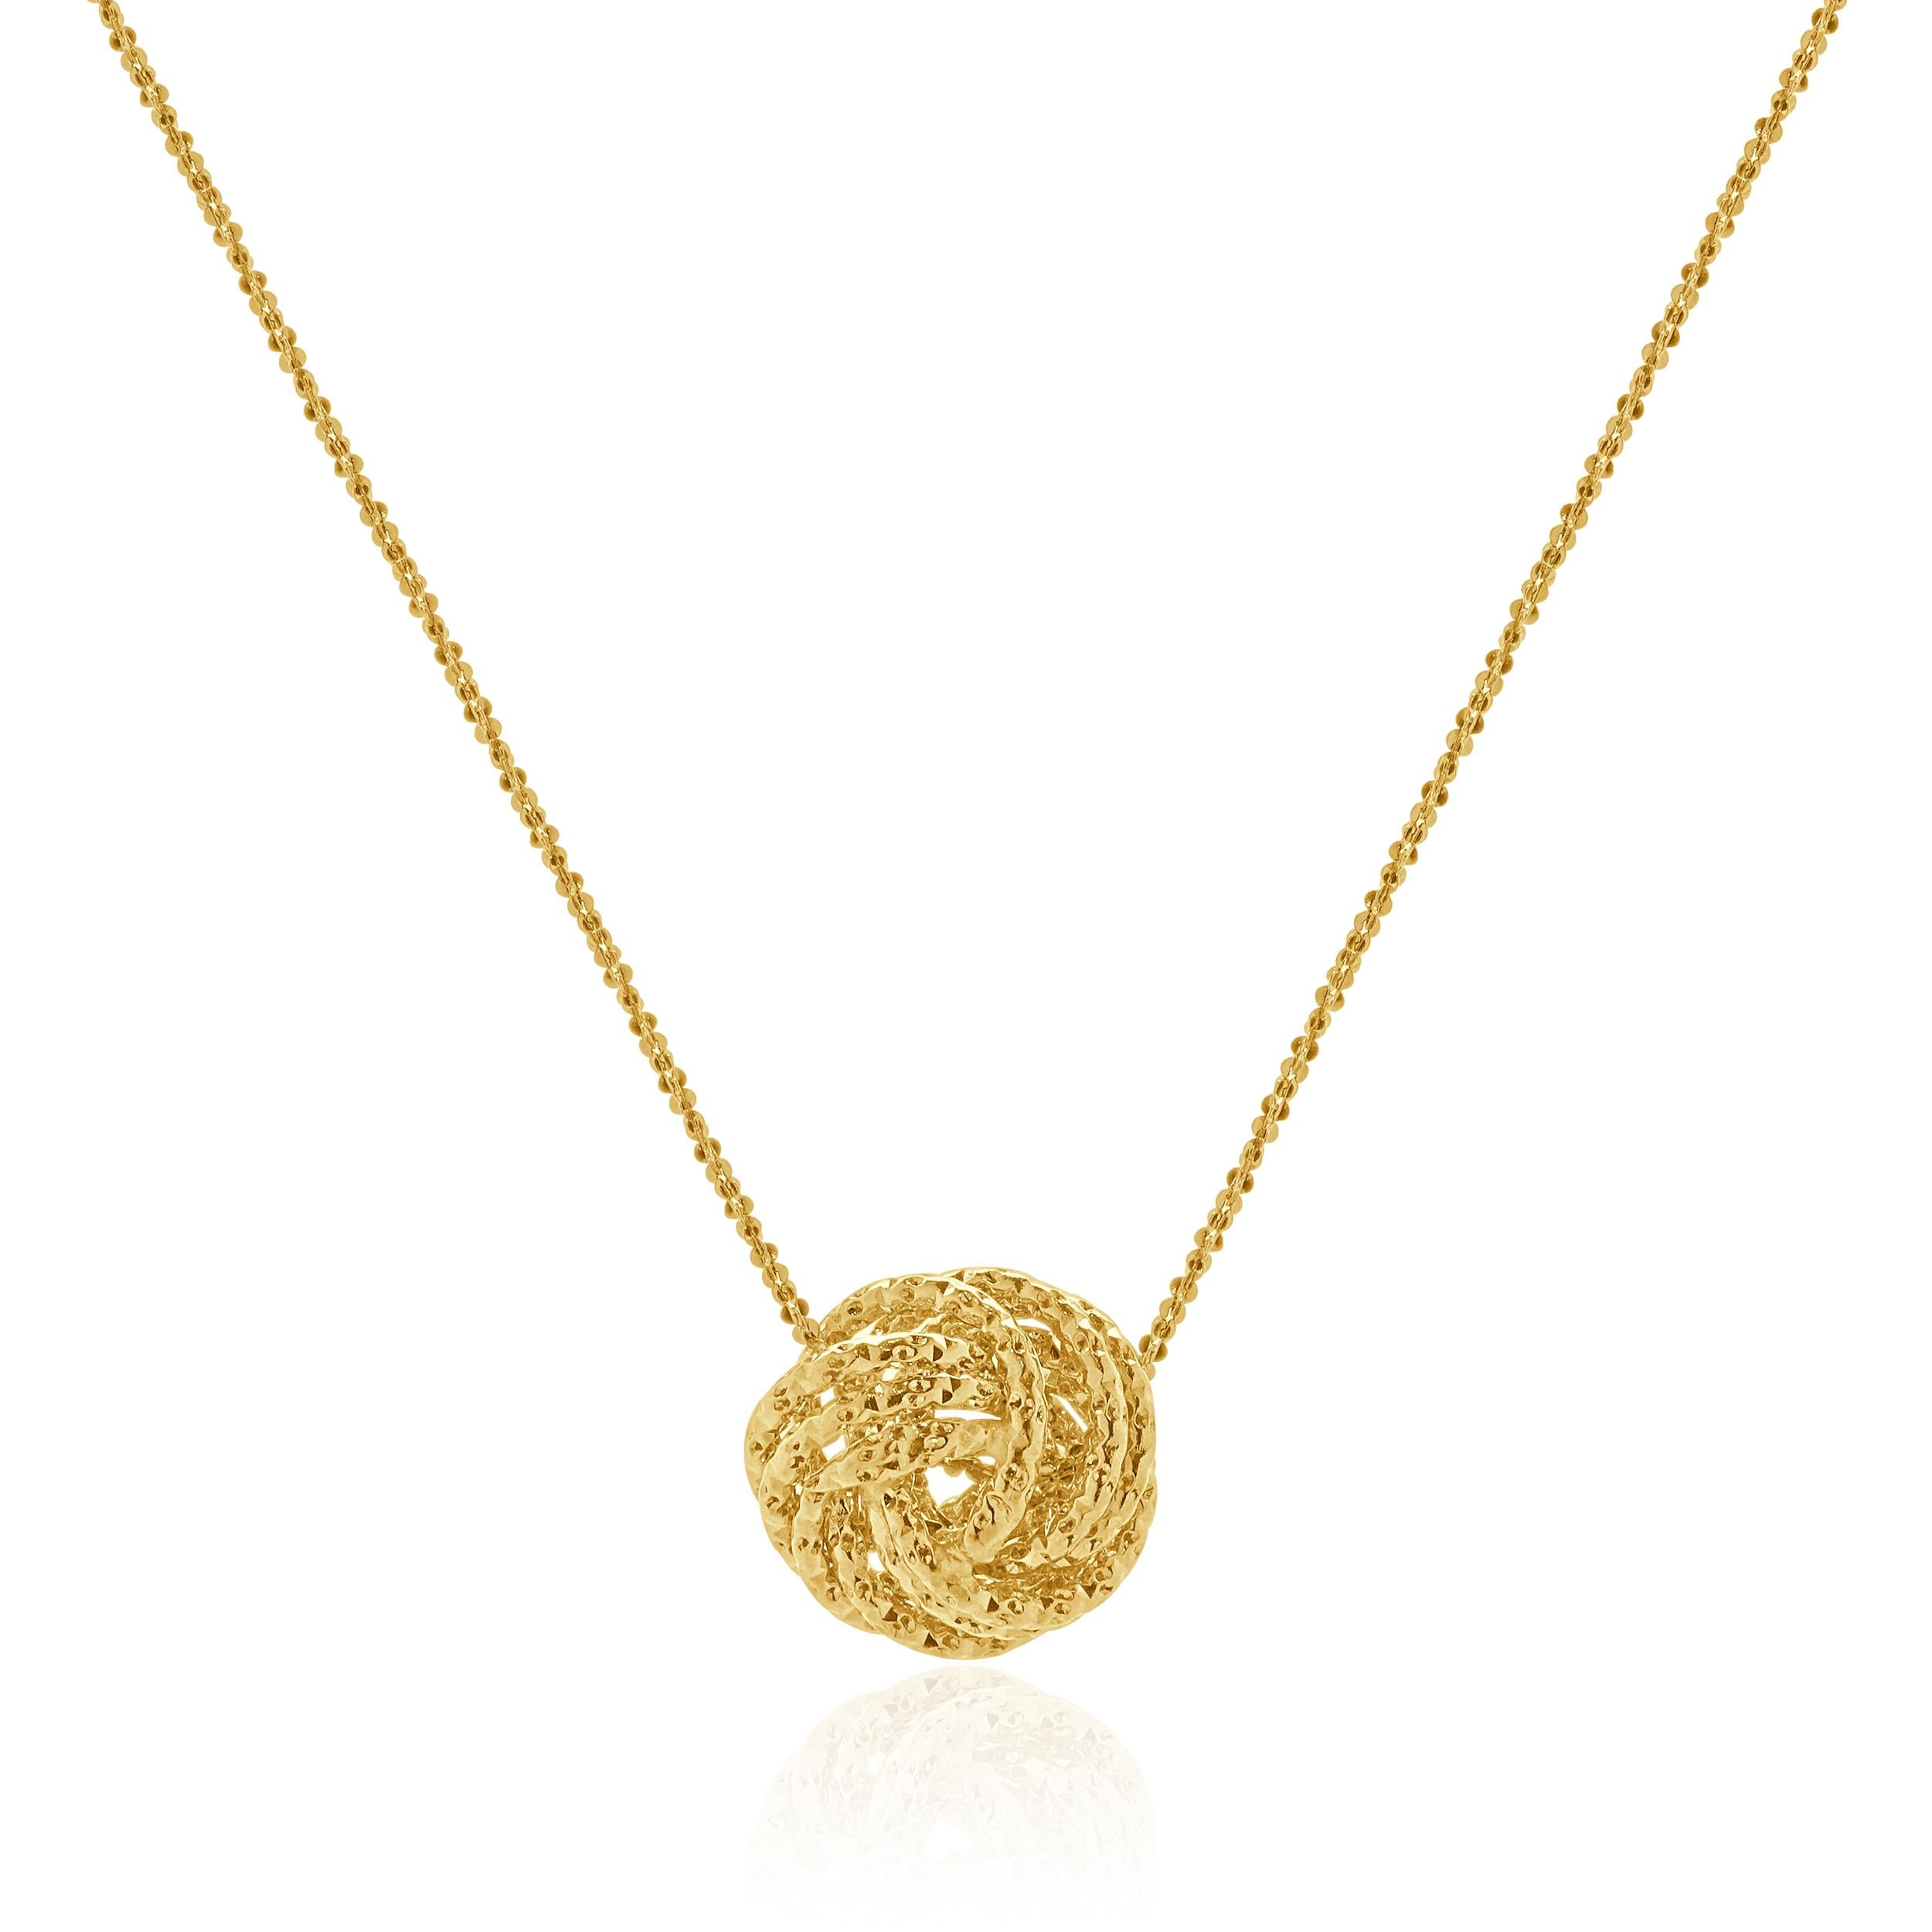 Designer: custom
Material: 14K yellow gold 
Dimensions: necklace measures 18-inches in length
Weight: 1.17 grams
